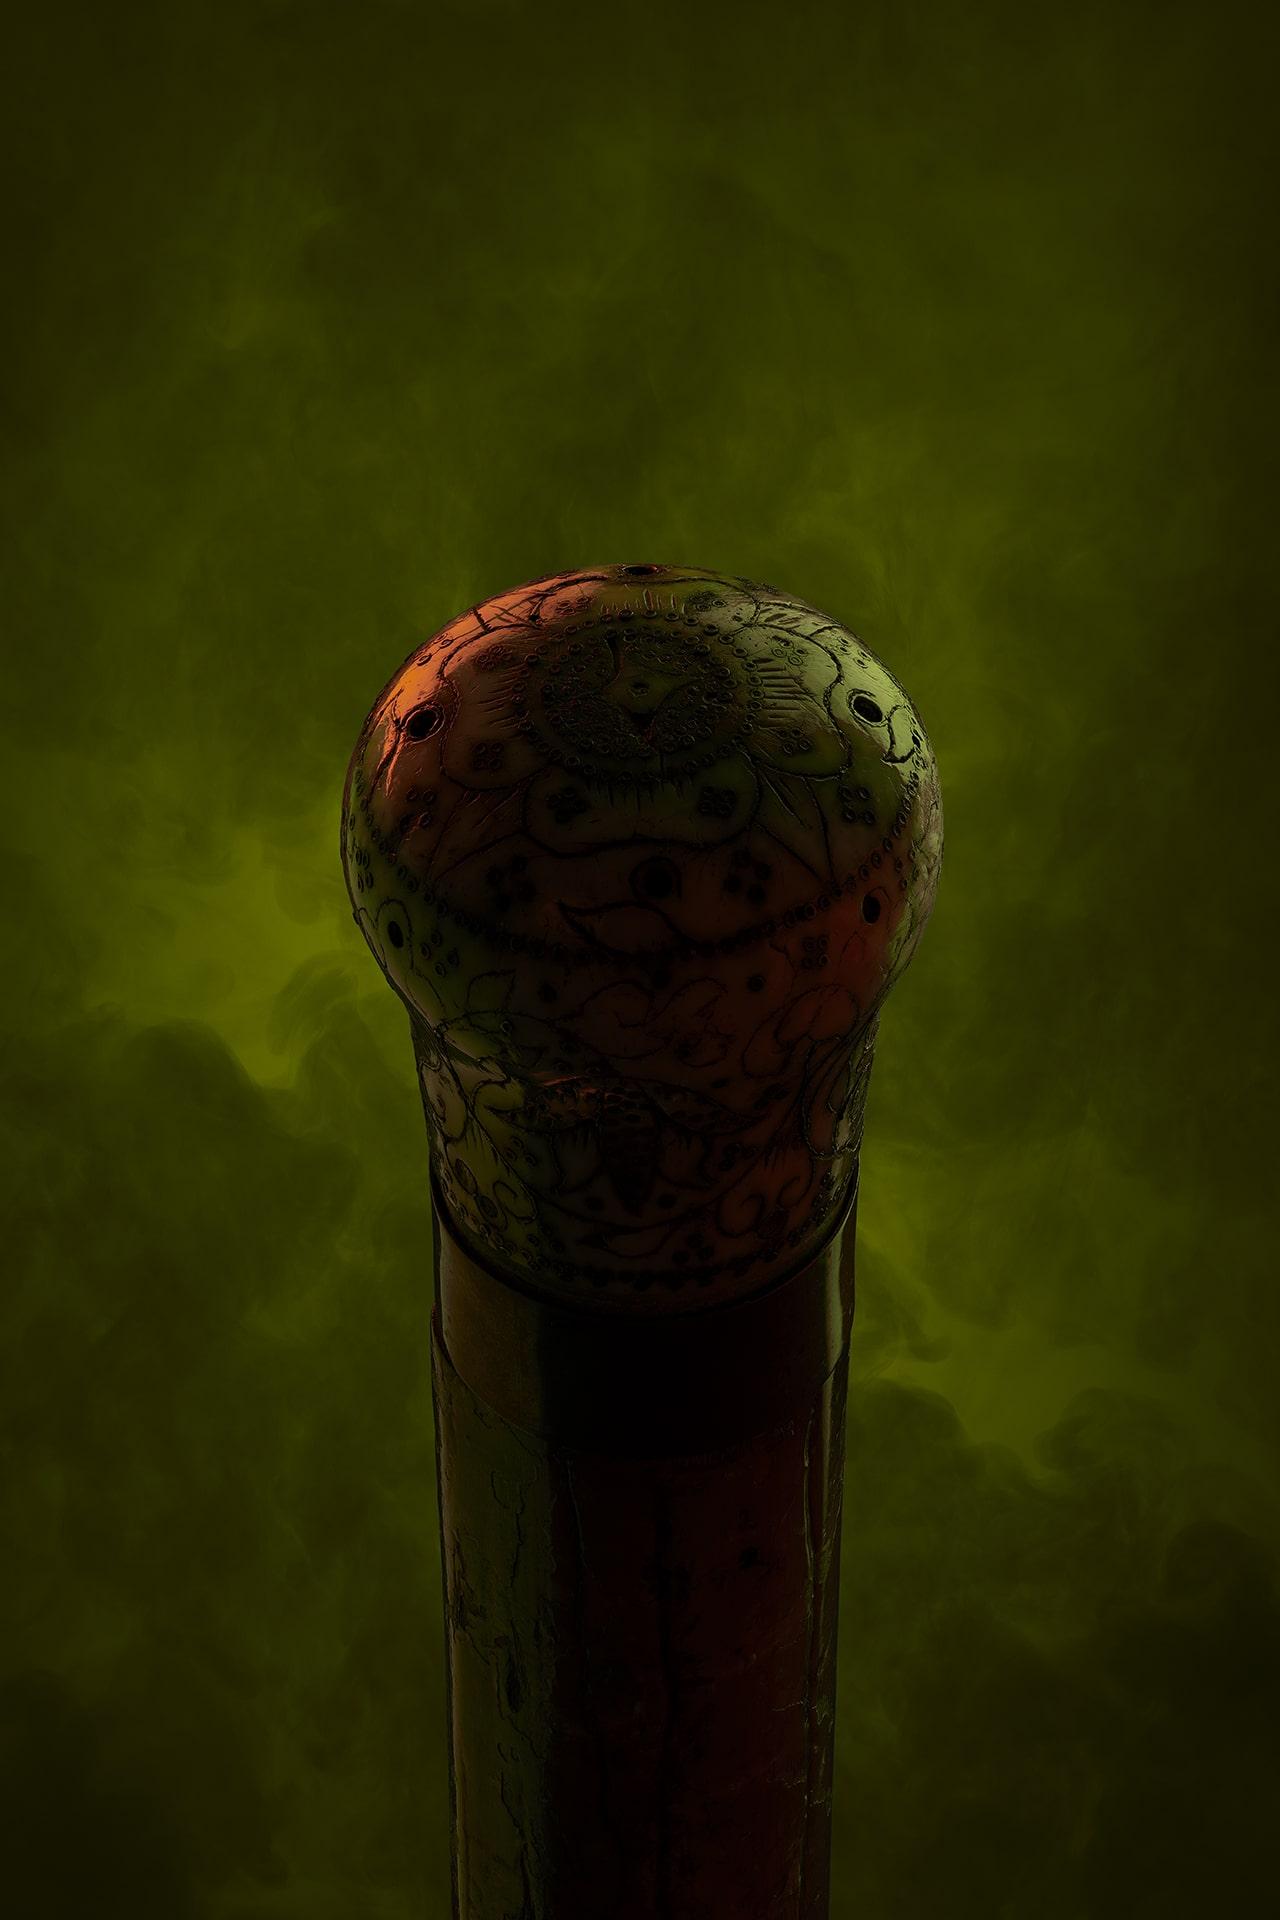 Mysterious item with bulbous end on dark green smoky background